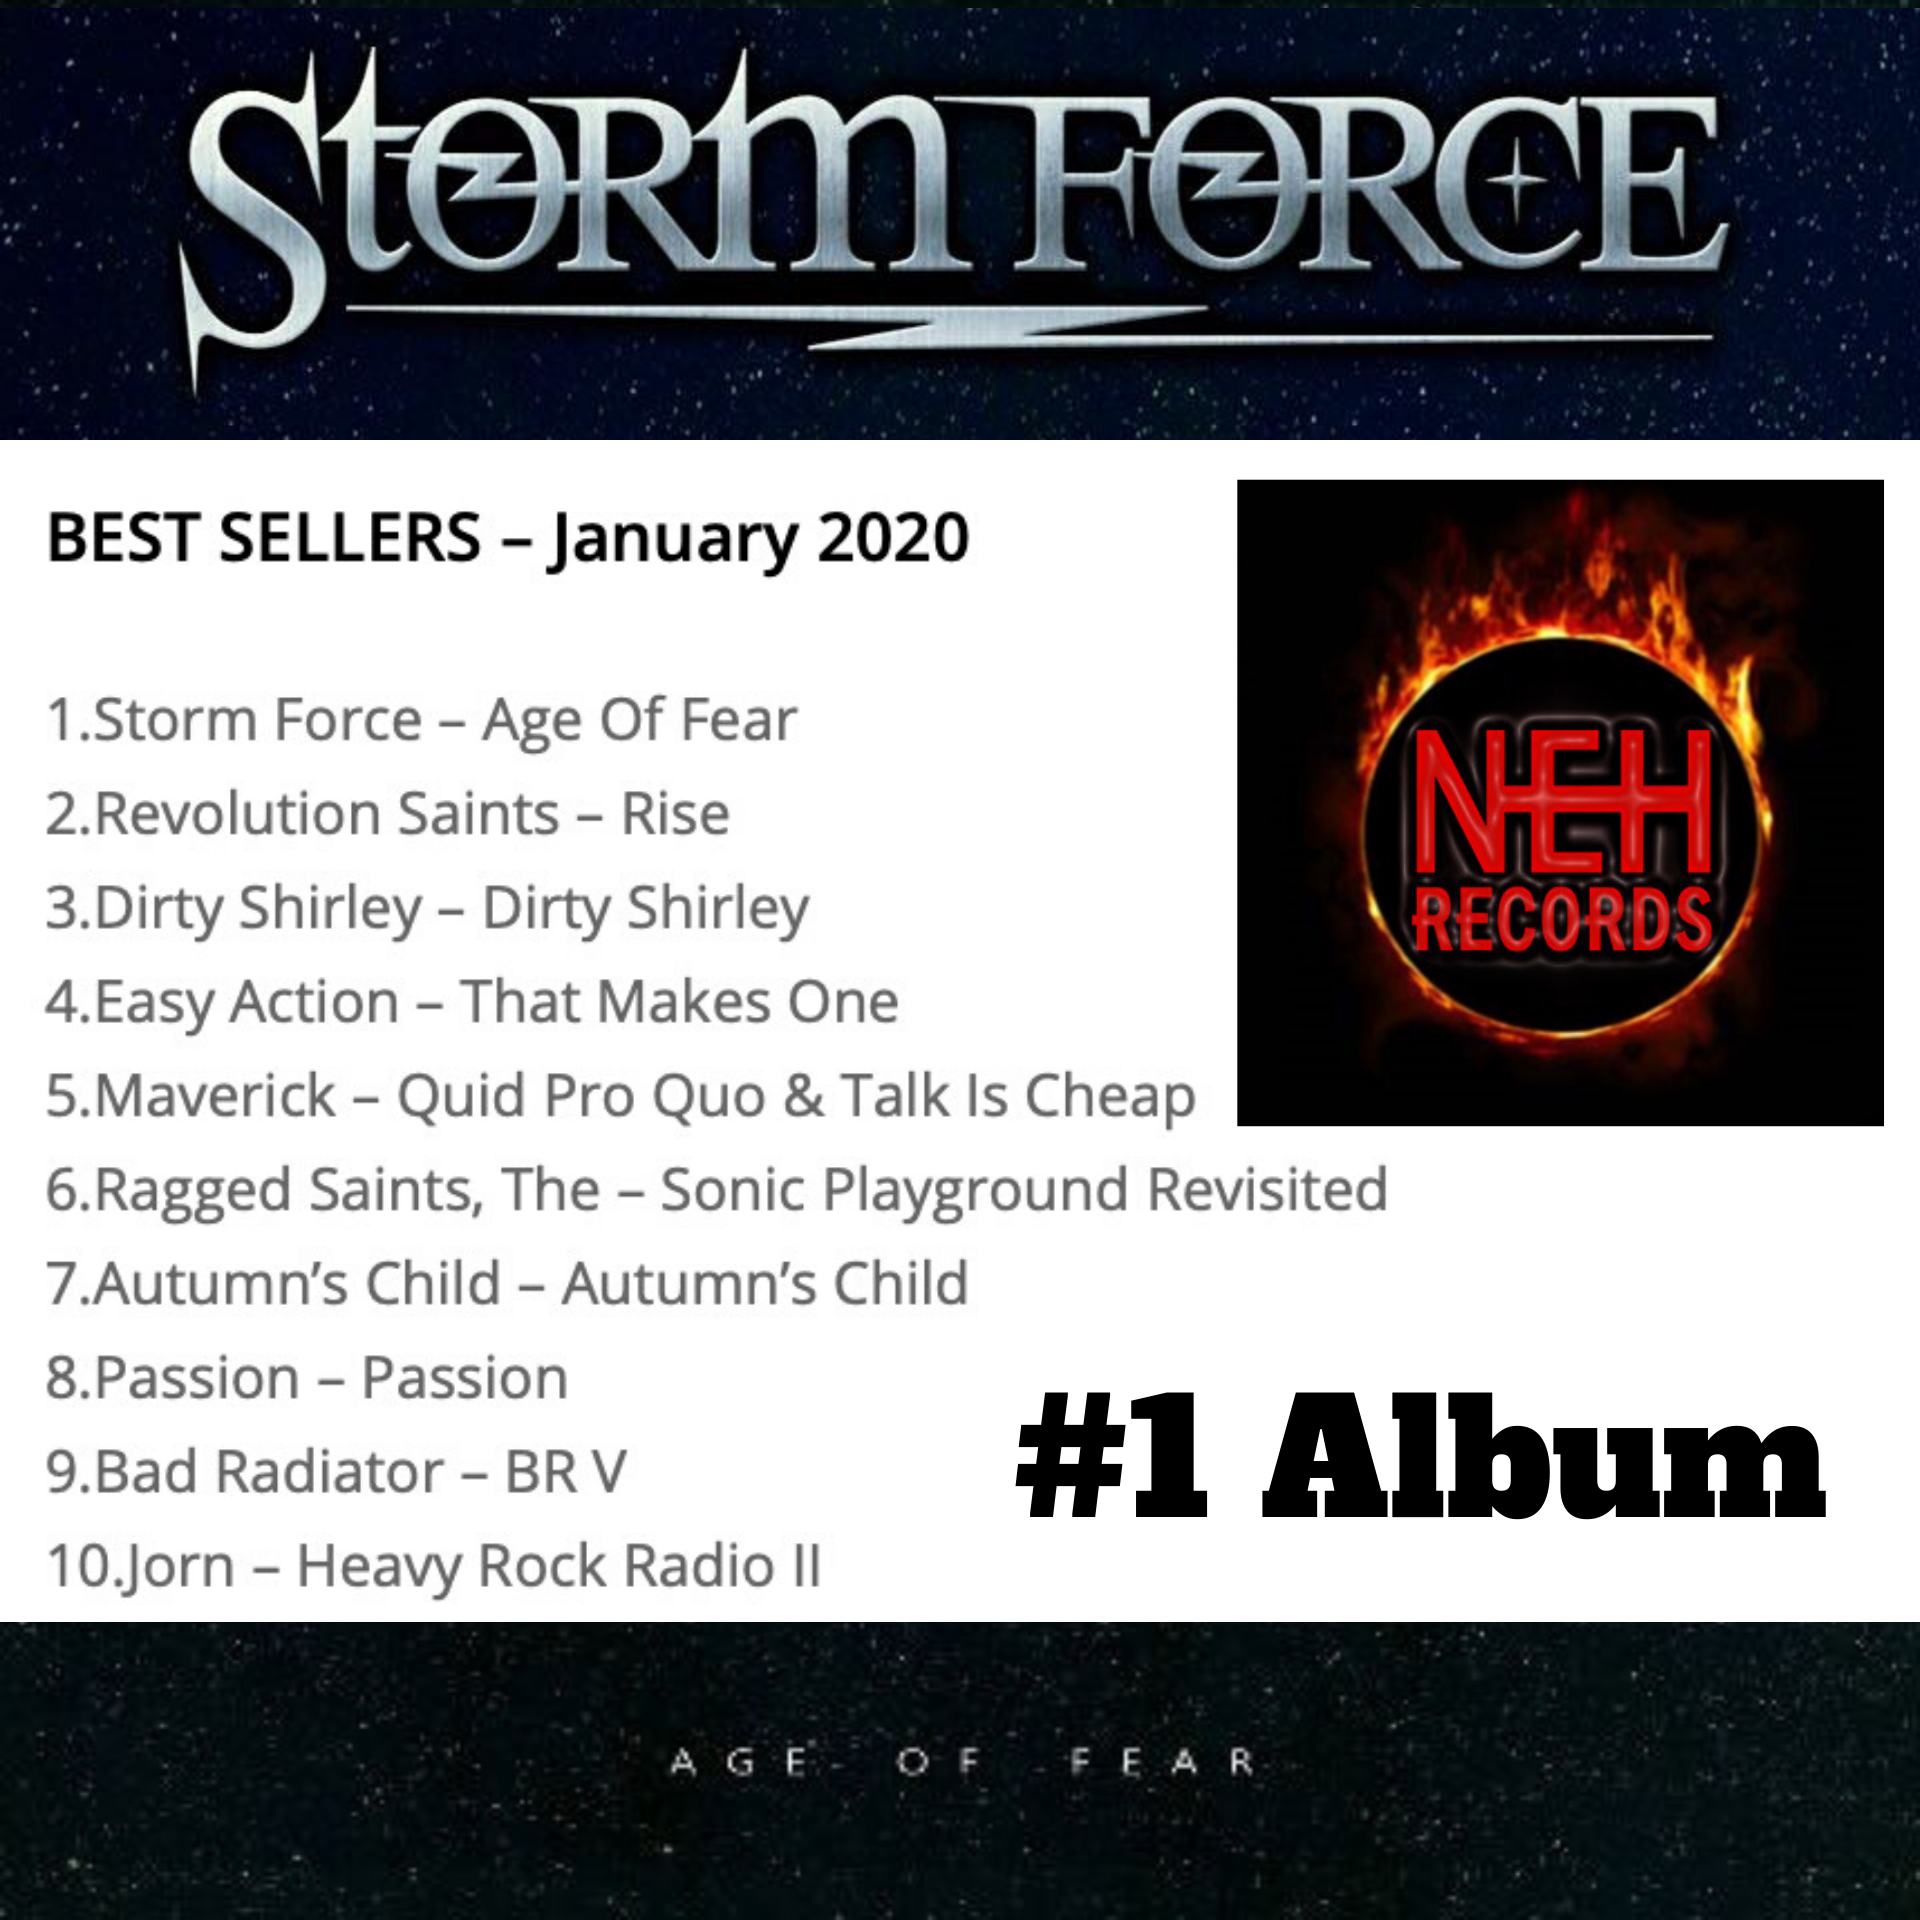 Storm Forces Debut Album Age Of Fear is the Best Selling Album for January at NEH Records.png